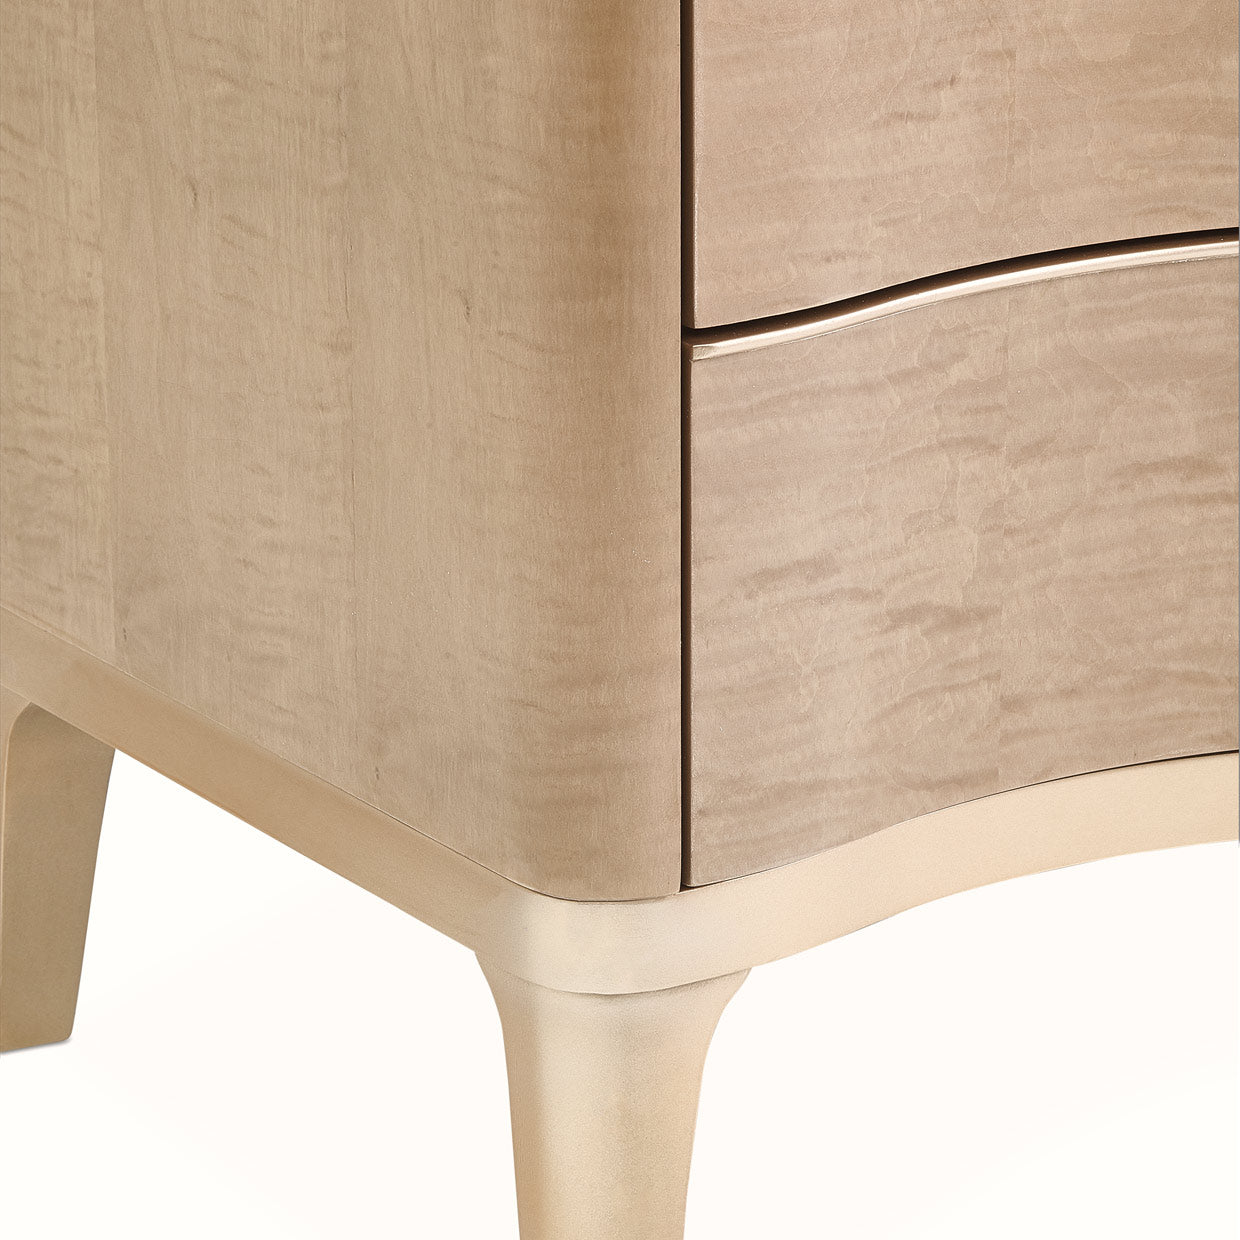 Malibu Crest Nightstand, Maple veneers, Waterfall handles, Cultured marble top, Hardwood solids, Blush finish, Chardonnay accents, Velvet lined drawers, Self-closing glides, Curved pulls, Pearl toned cultured marble, Bedroom furniture, dream art, Michael amini